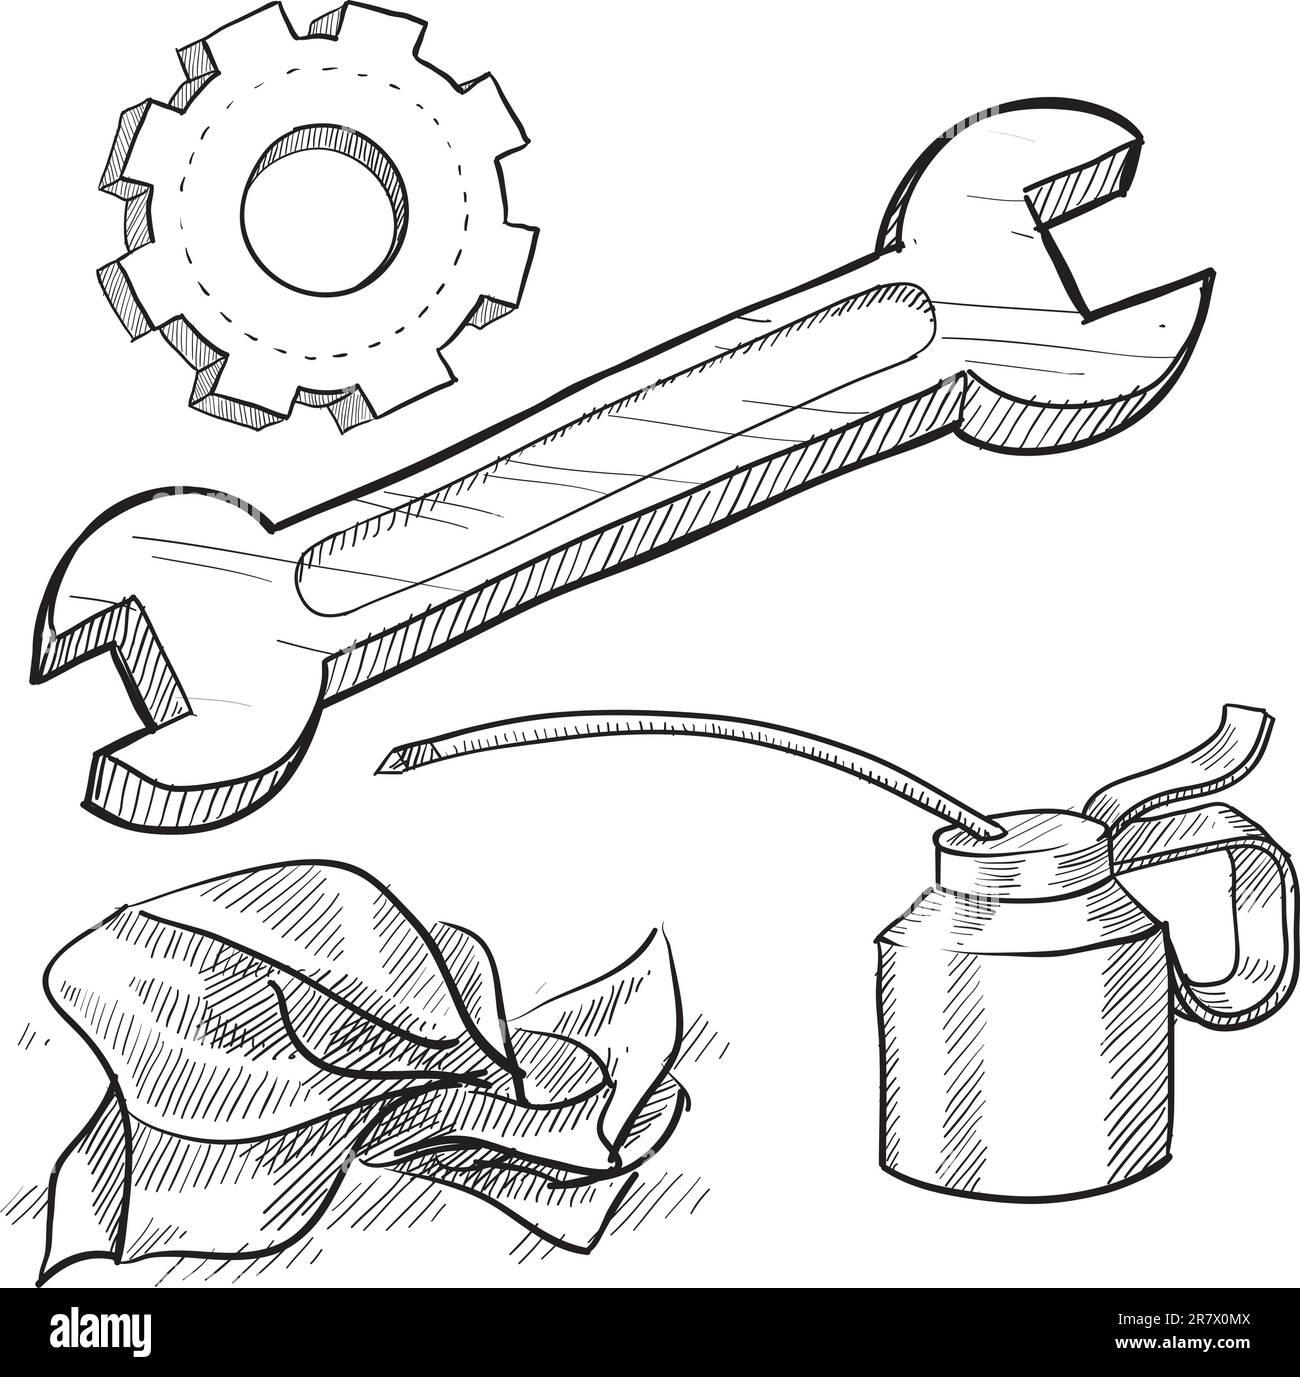 Doodle style mechanic or car maintenance vector illustration with oil can, wrench, gear, and rag Stock Vector